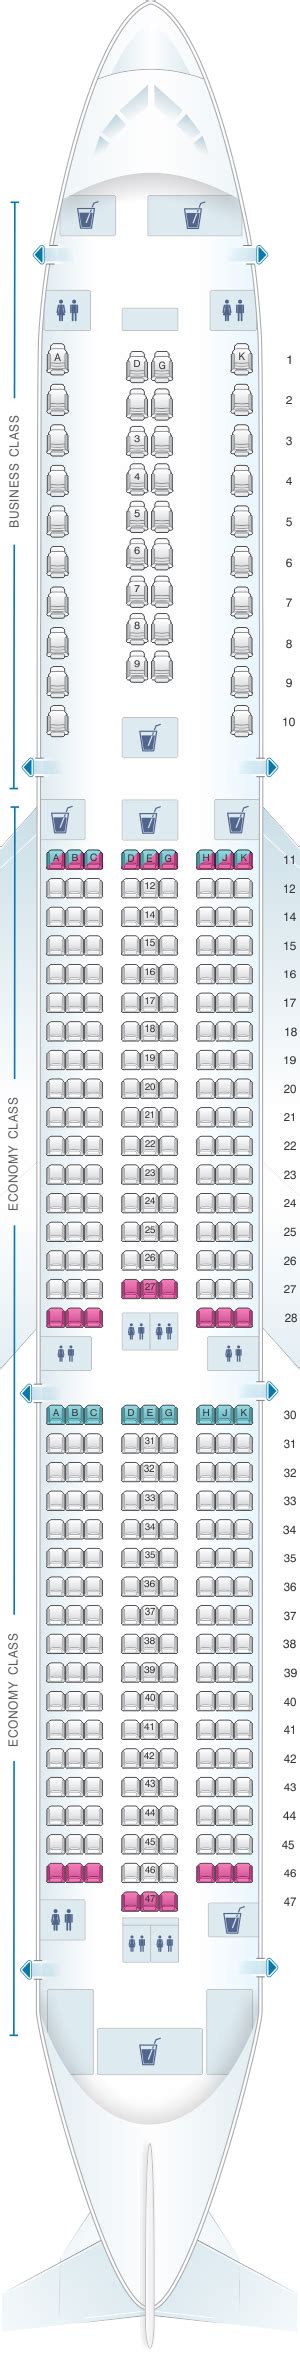 delta 787 seating chart